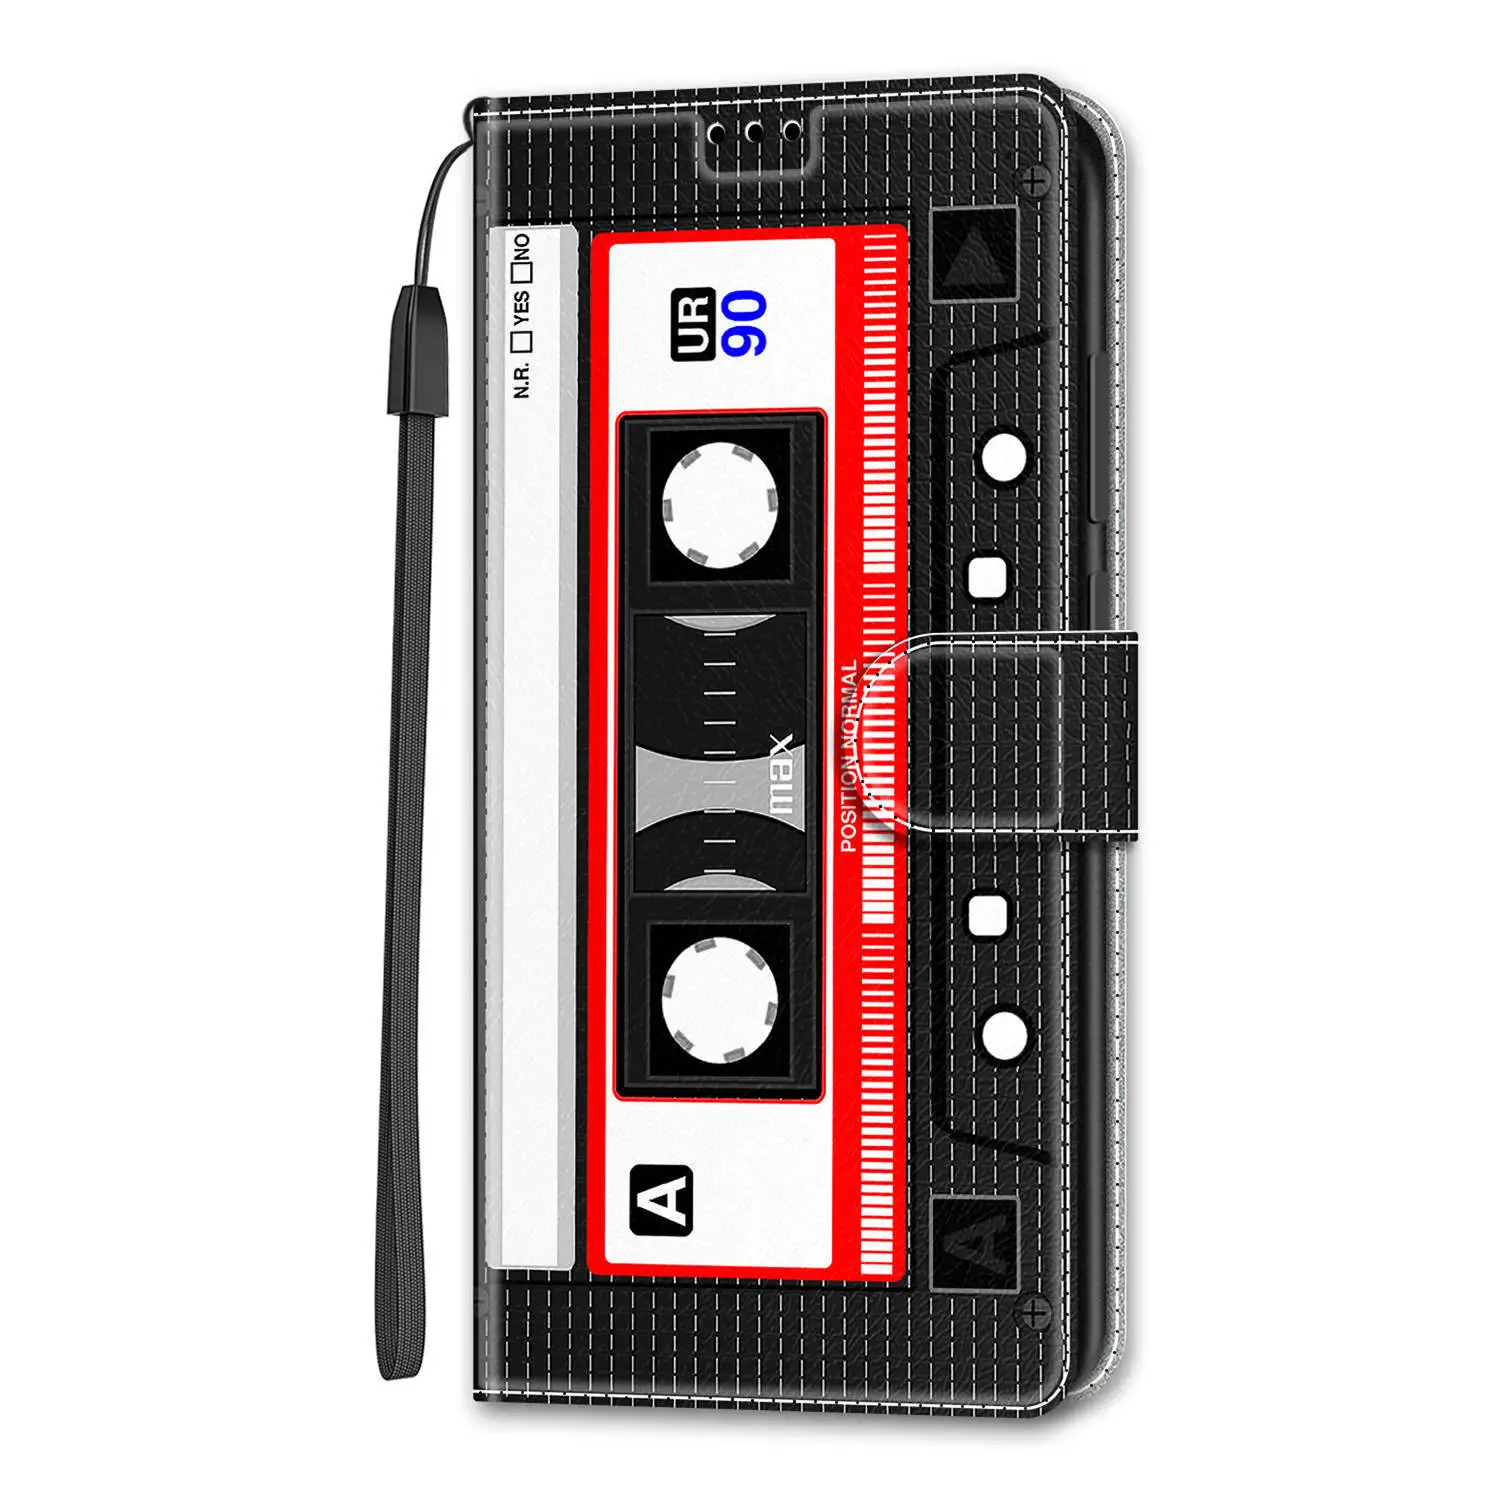 iphone 13 mini flip case Etui Flip Leather Phone Case For Nokia 2.3 6.3 1.4 2.4 G10 G20 G11 G21 Wallet Card Holder Stand For iPhone 13 mini 12 Book Cover cheap iphone 13 mini case